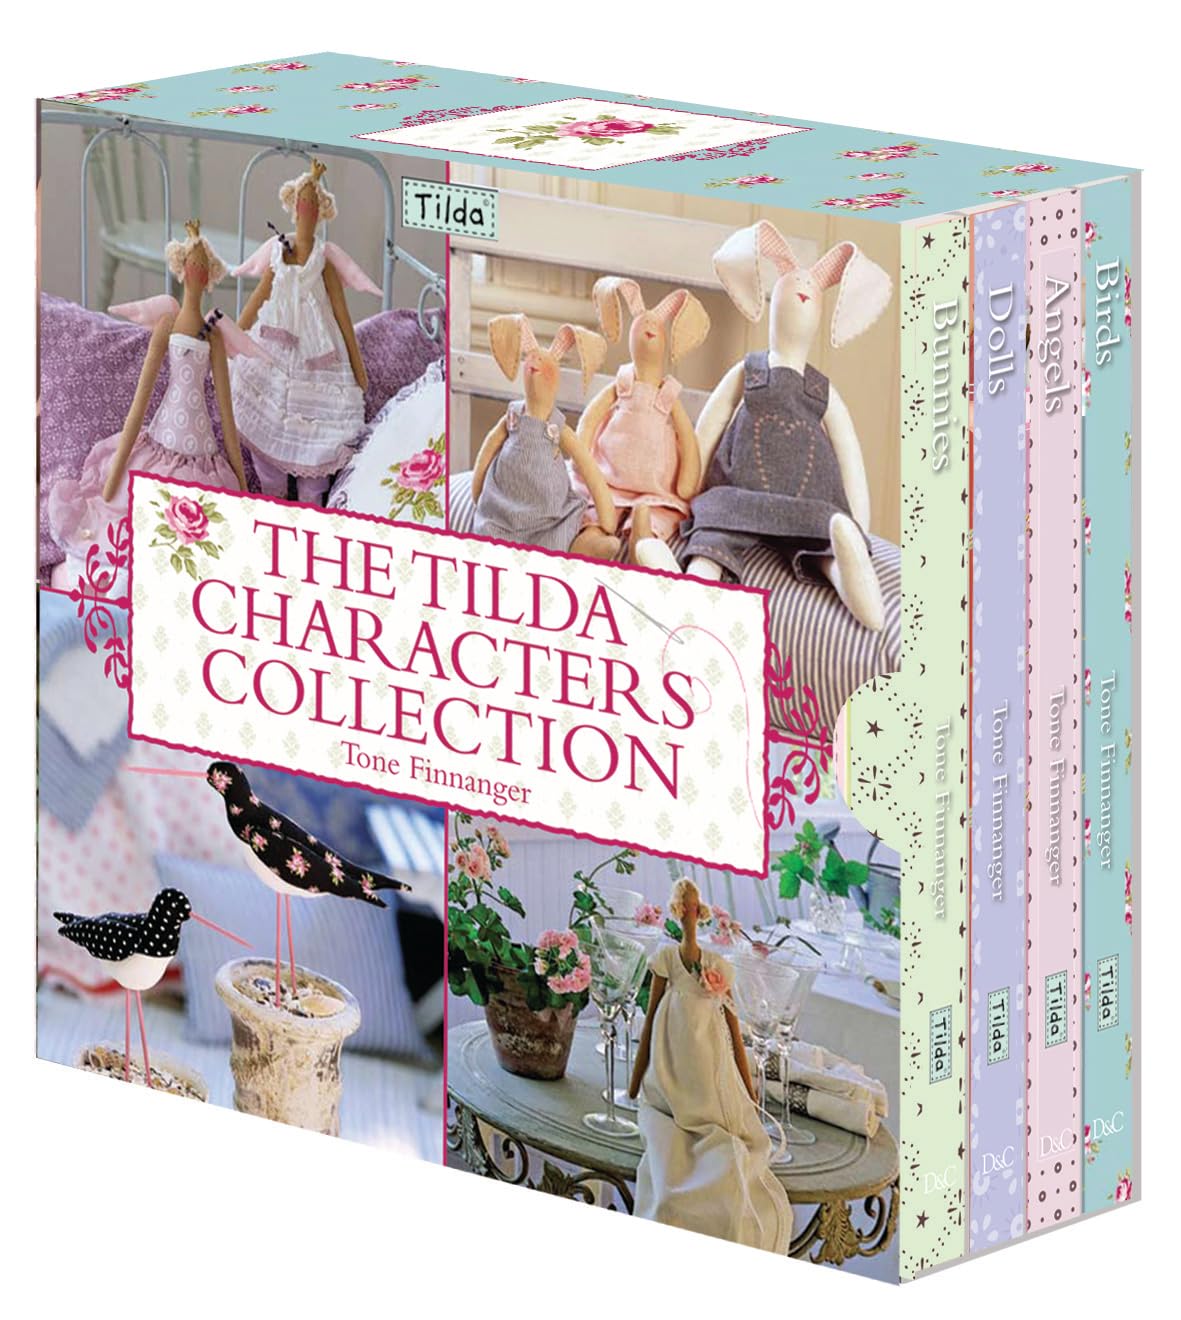 Finnanger Tone The Tilda Characters Collection: WITH Birds AND Bunnies AND Angels AND Dolls () 